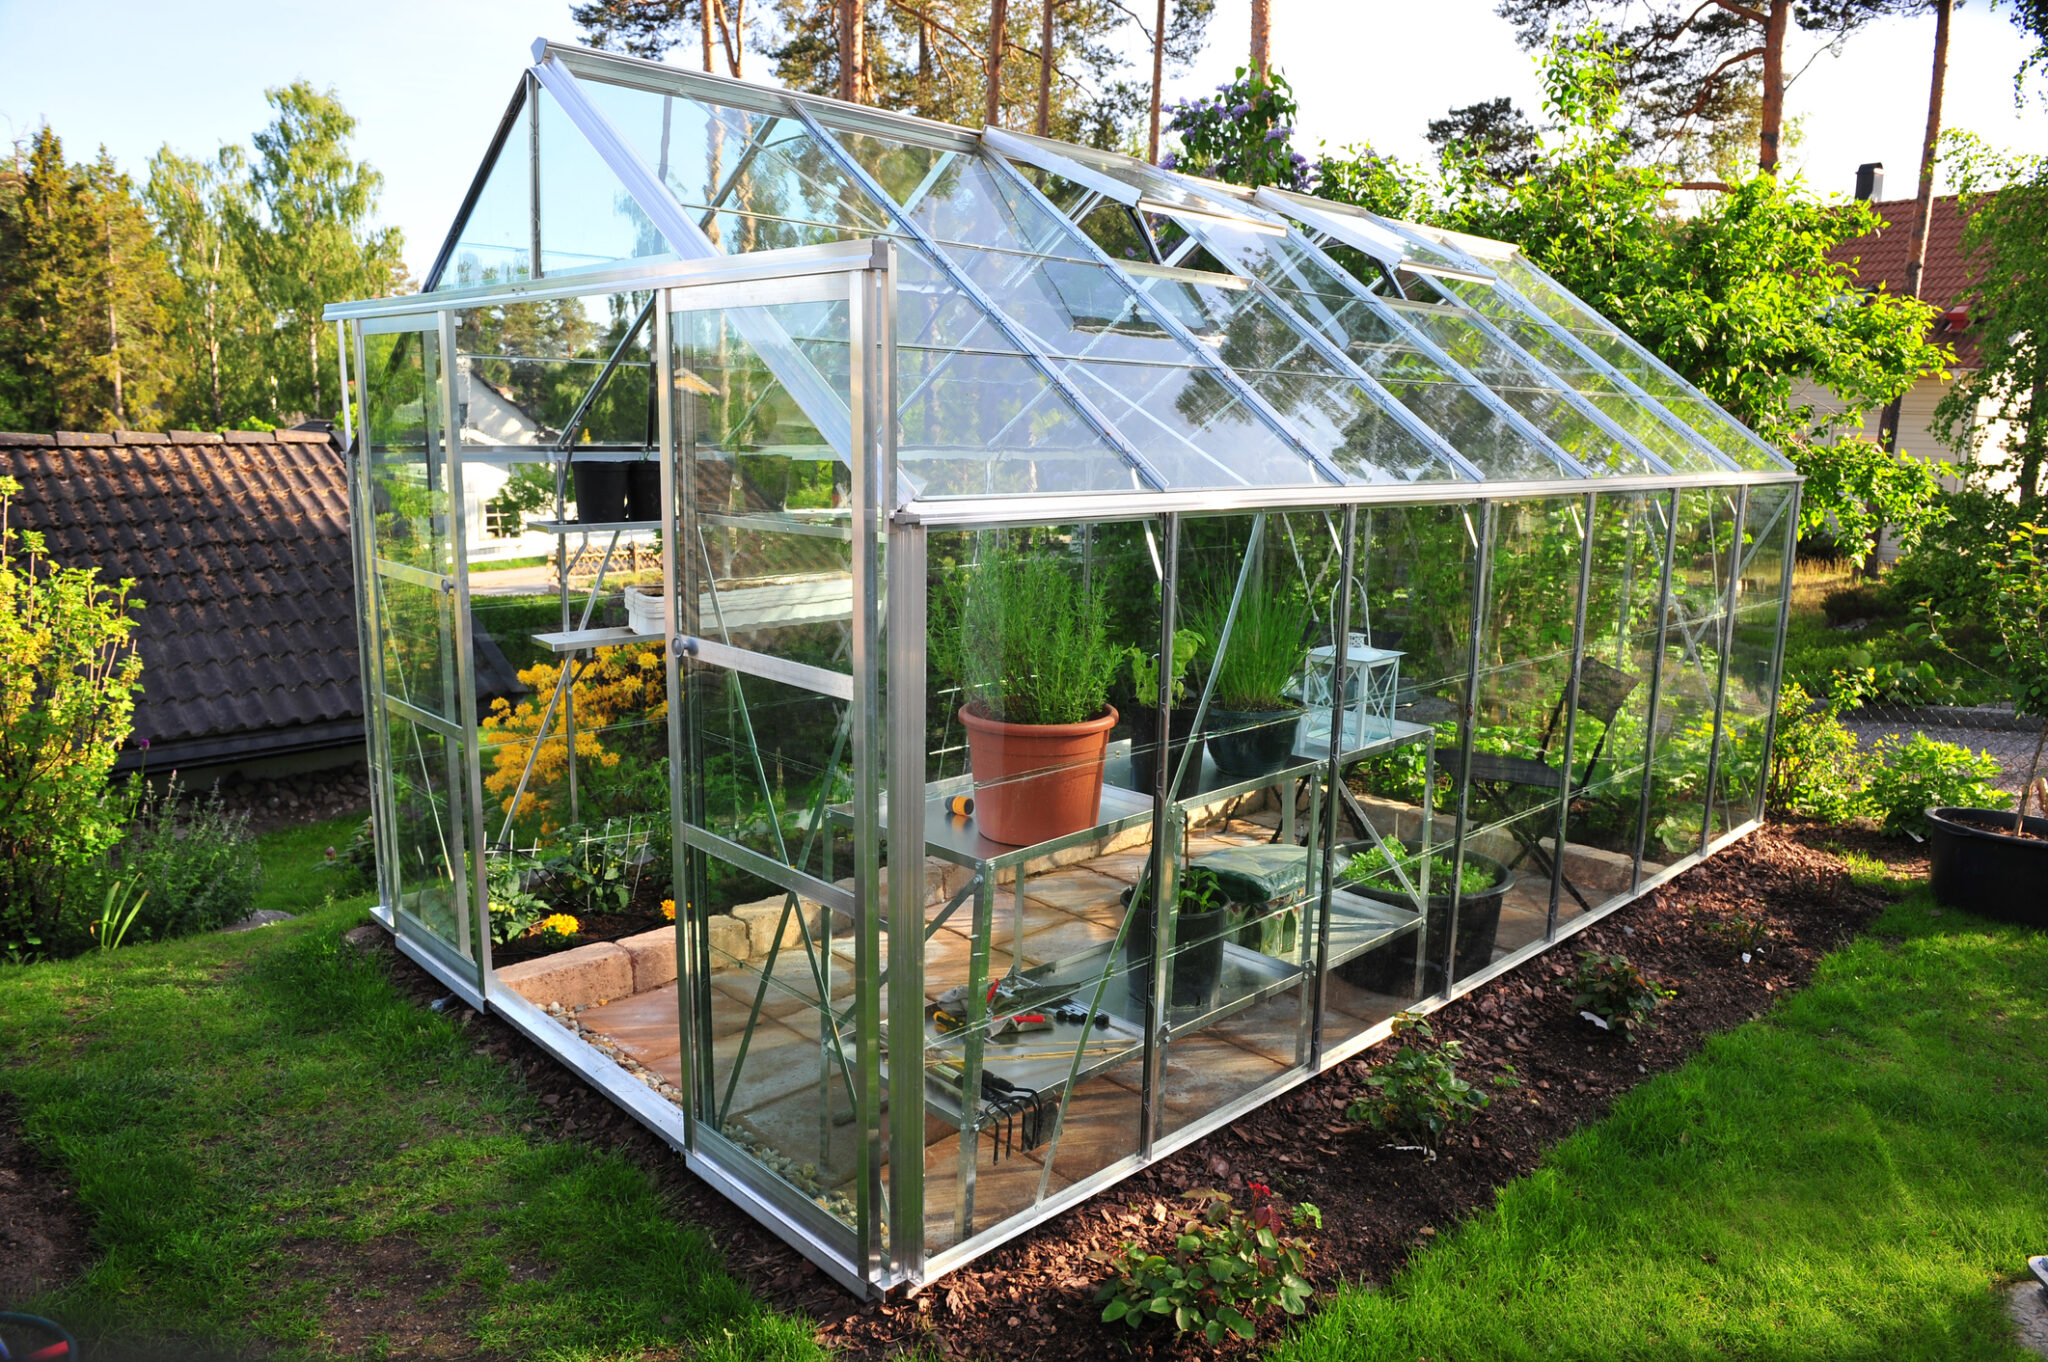 why is a greenhouse warm and how does a greenhouse trap heat